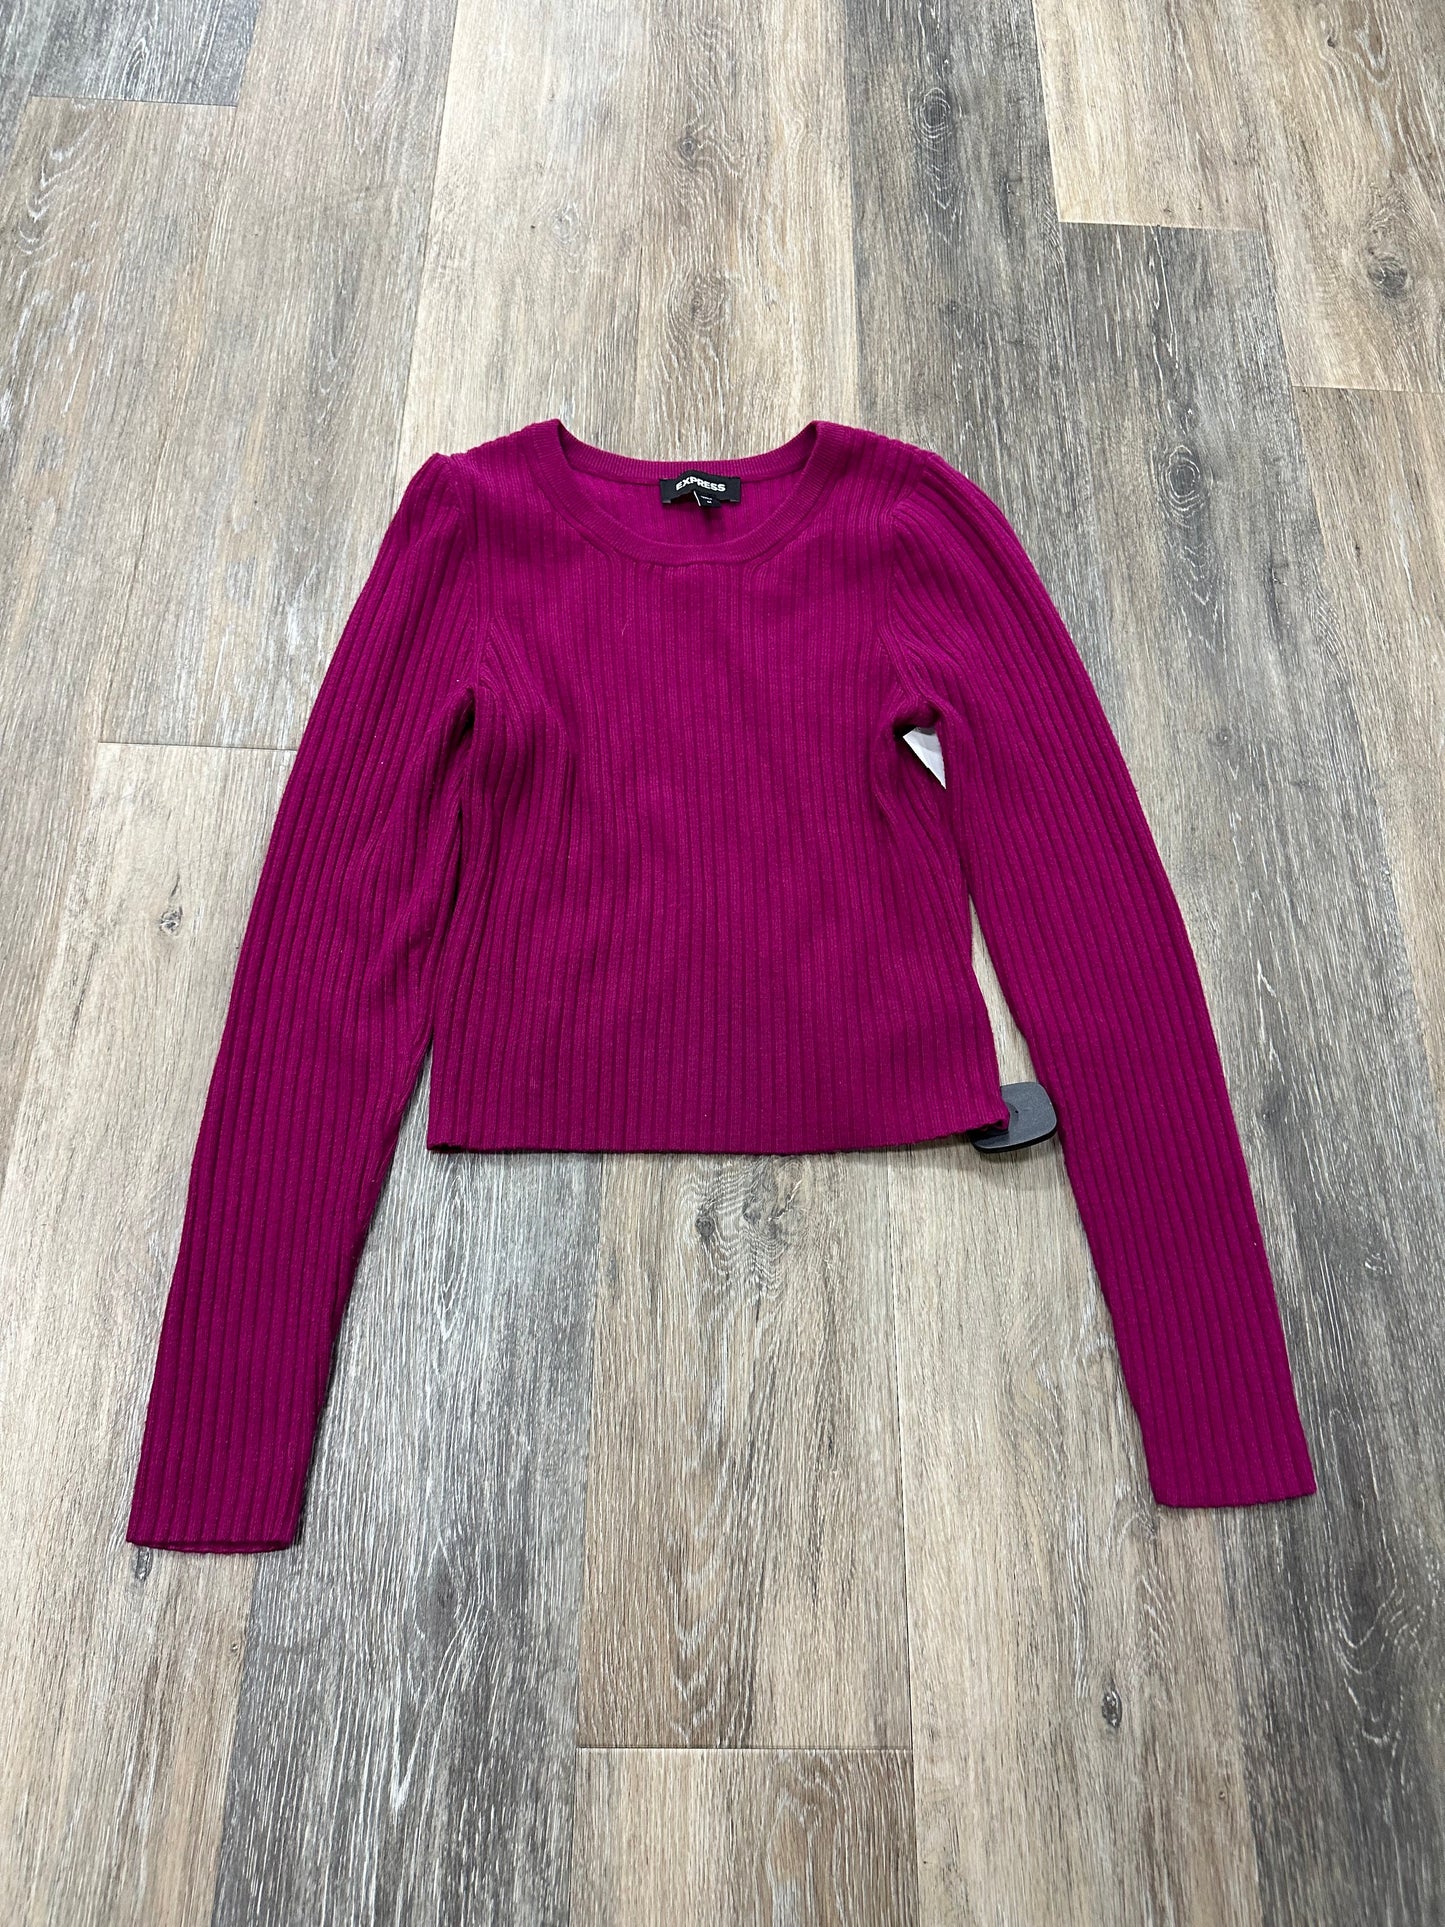 Top Long Sleeve By Express  Size: M